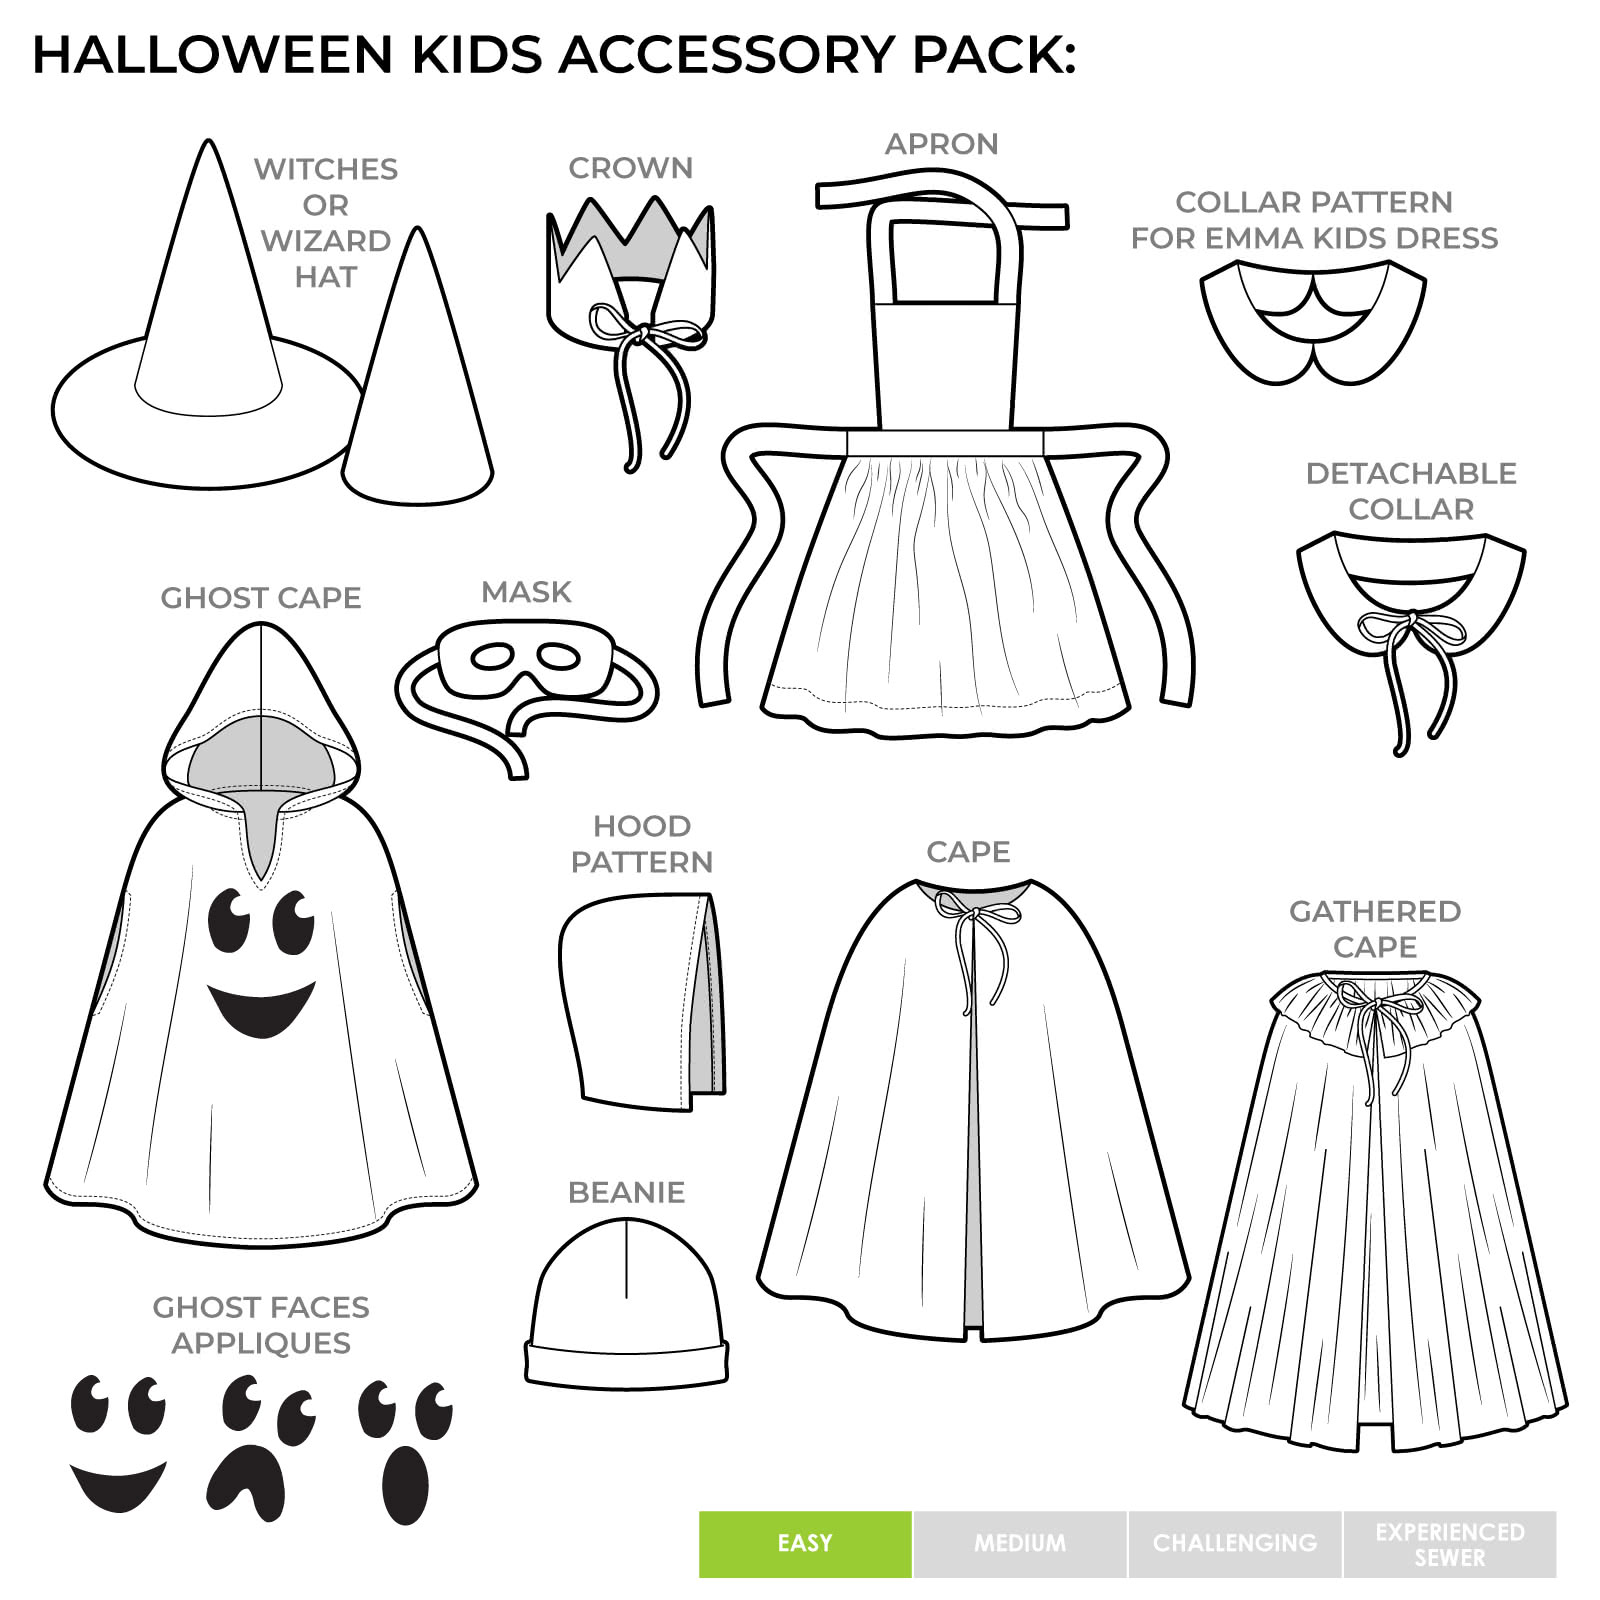 Halloween Kids Accessory Pack By Style Arc - Cape, hood, witches' hat, apron, crown, beanie, Peter Pan collar, and eye mask, sized 2-5 & 6-10